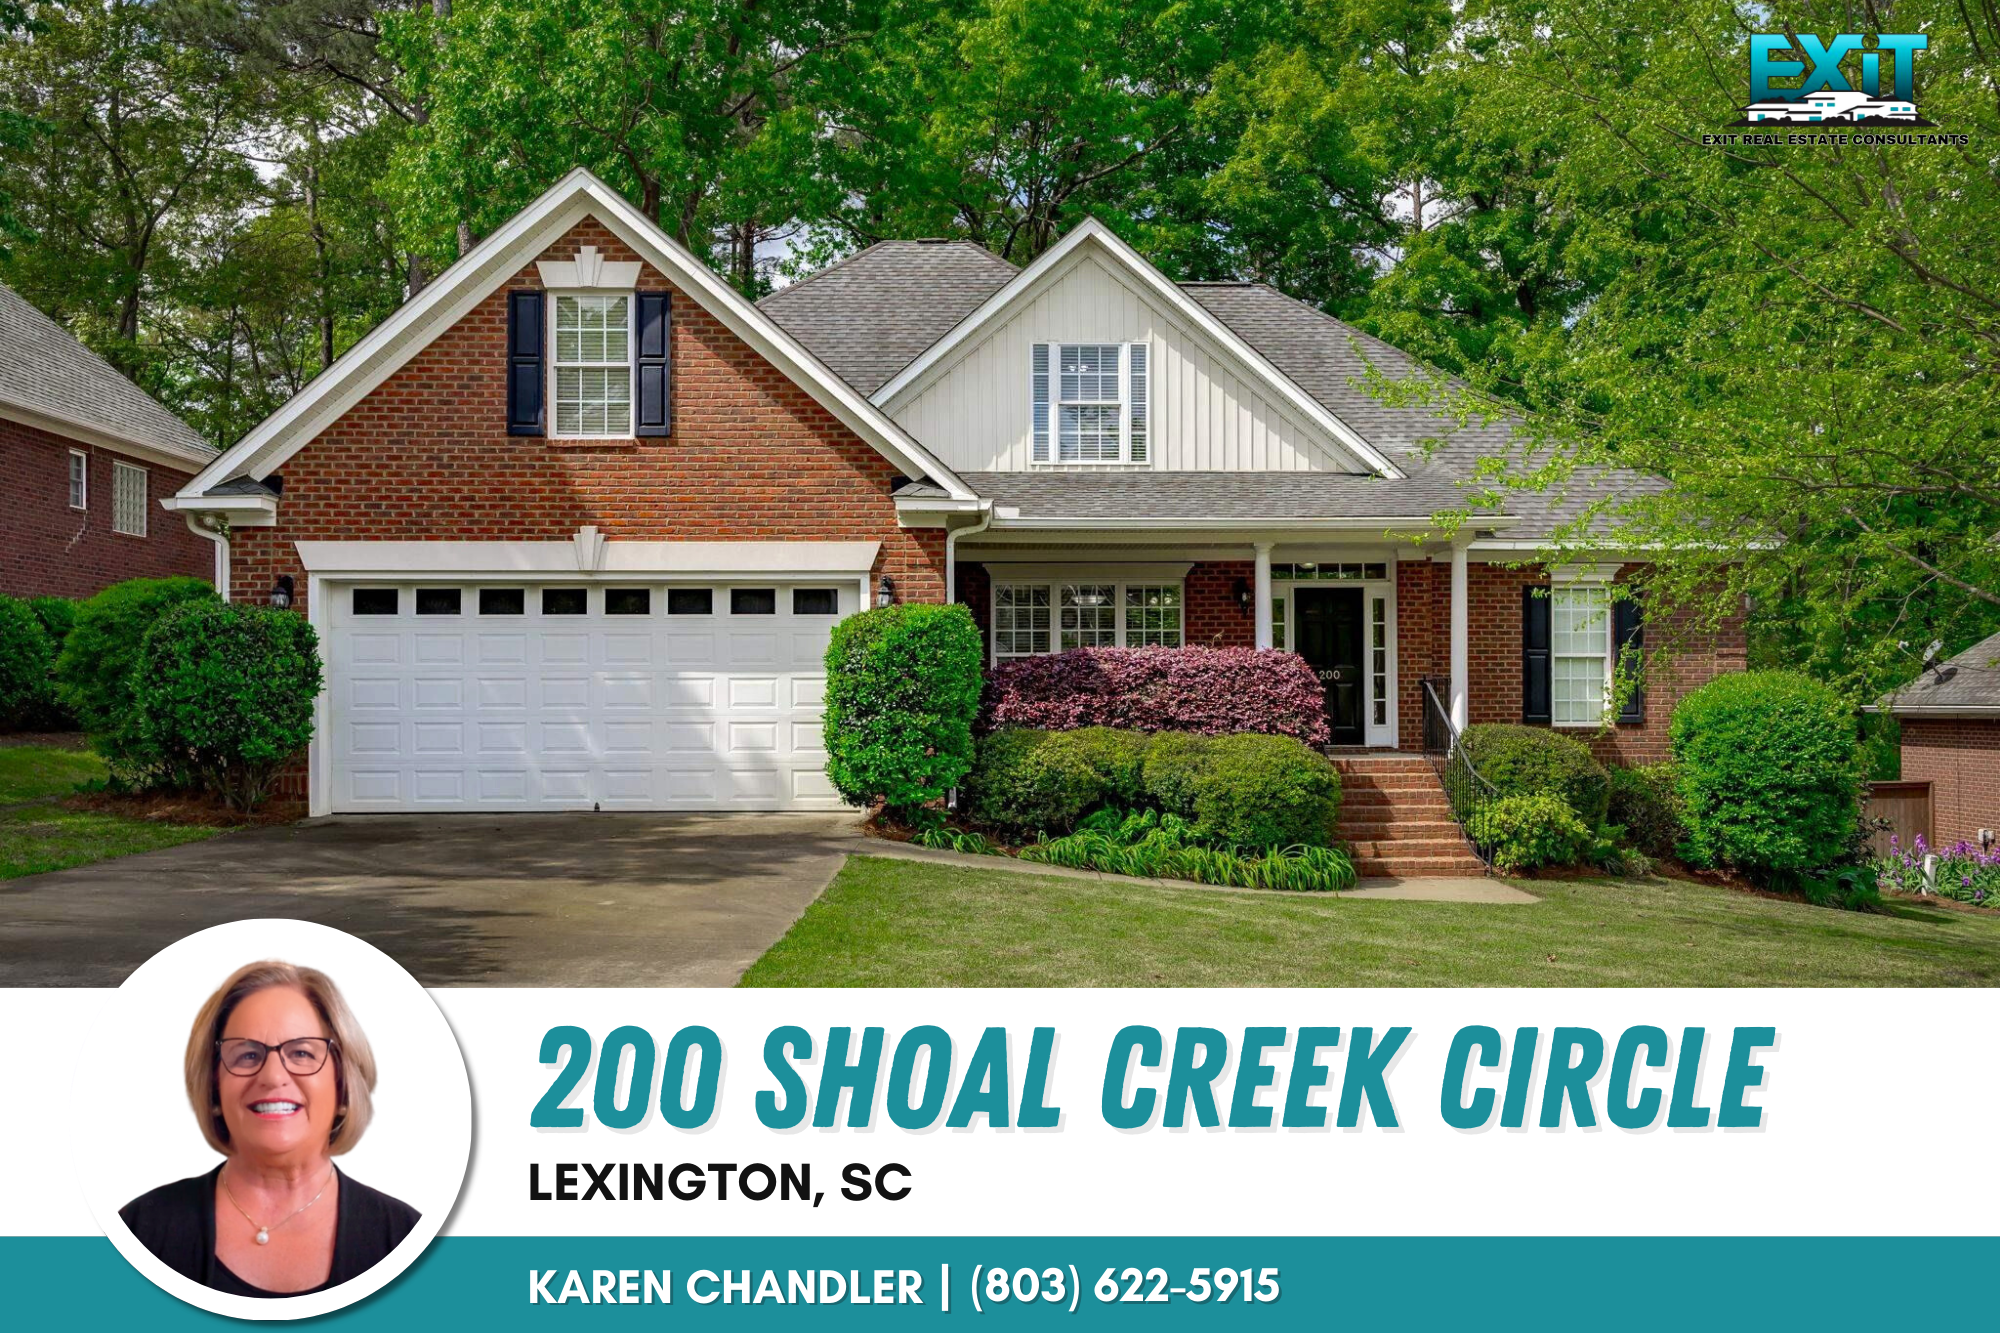 Just listed in Shoal Creek - Lexington